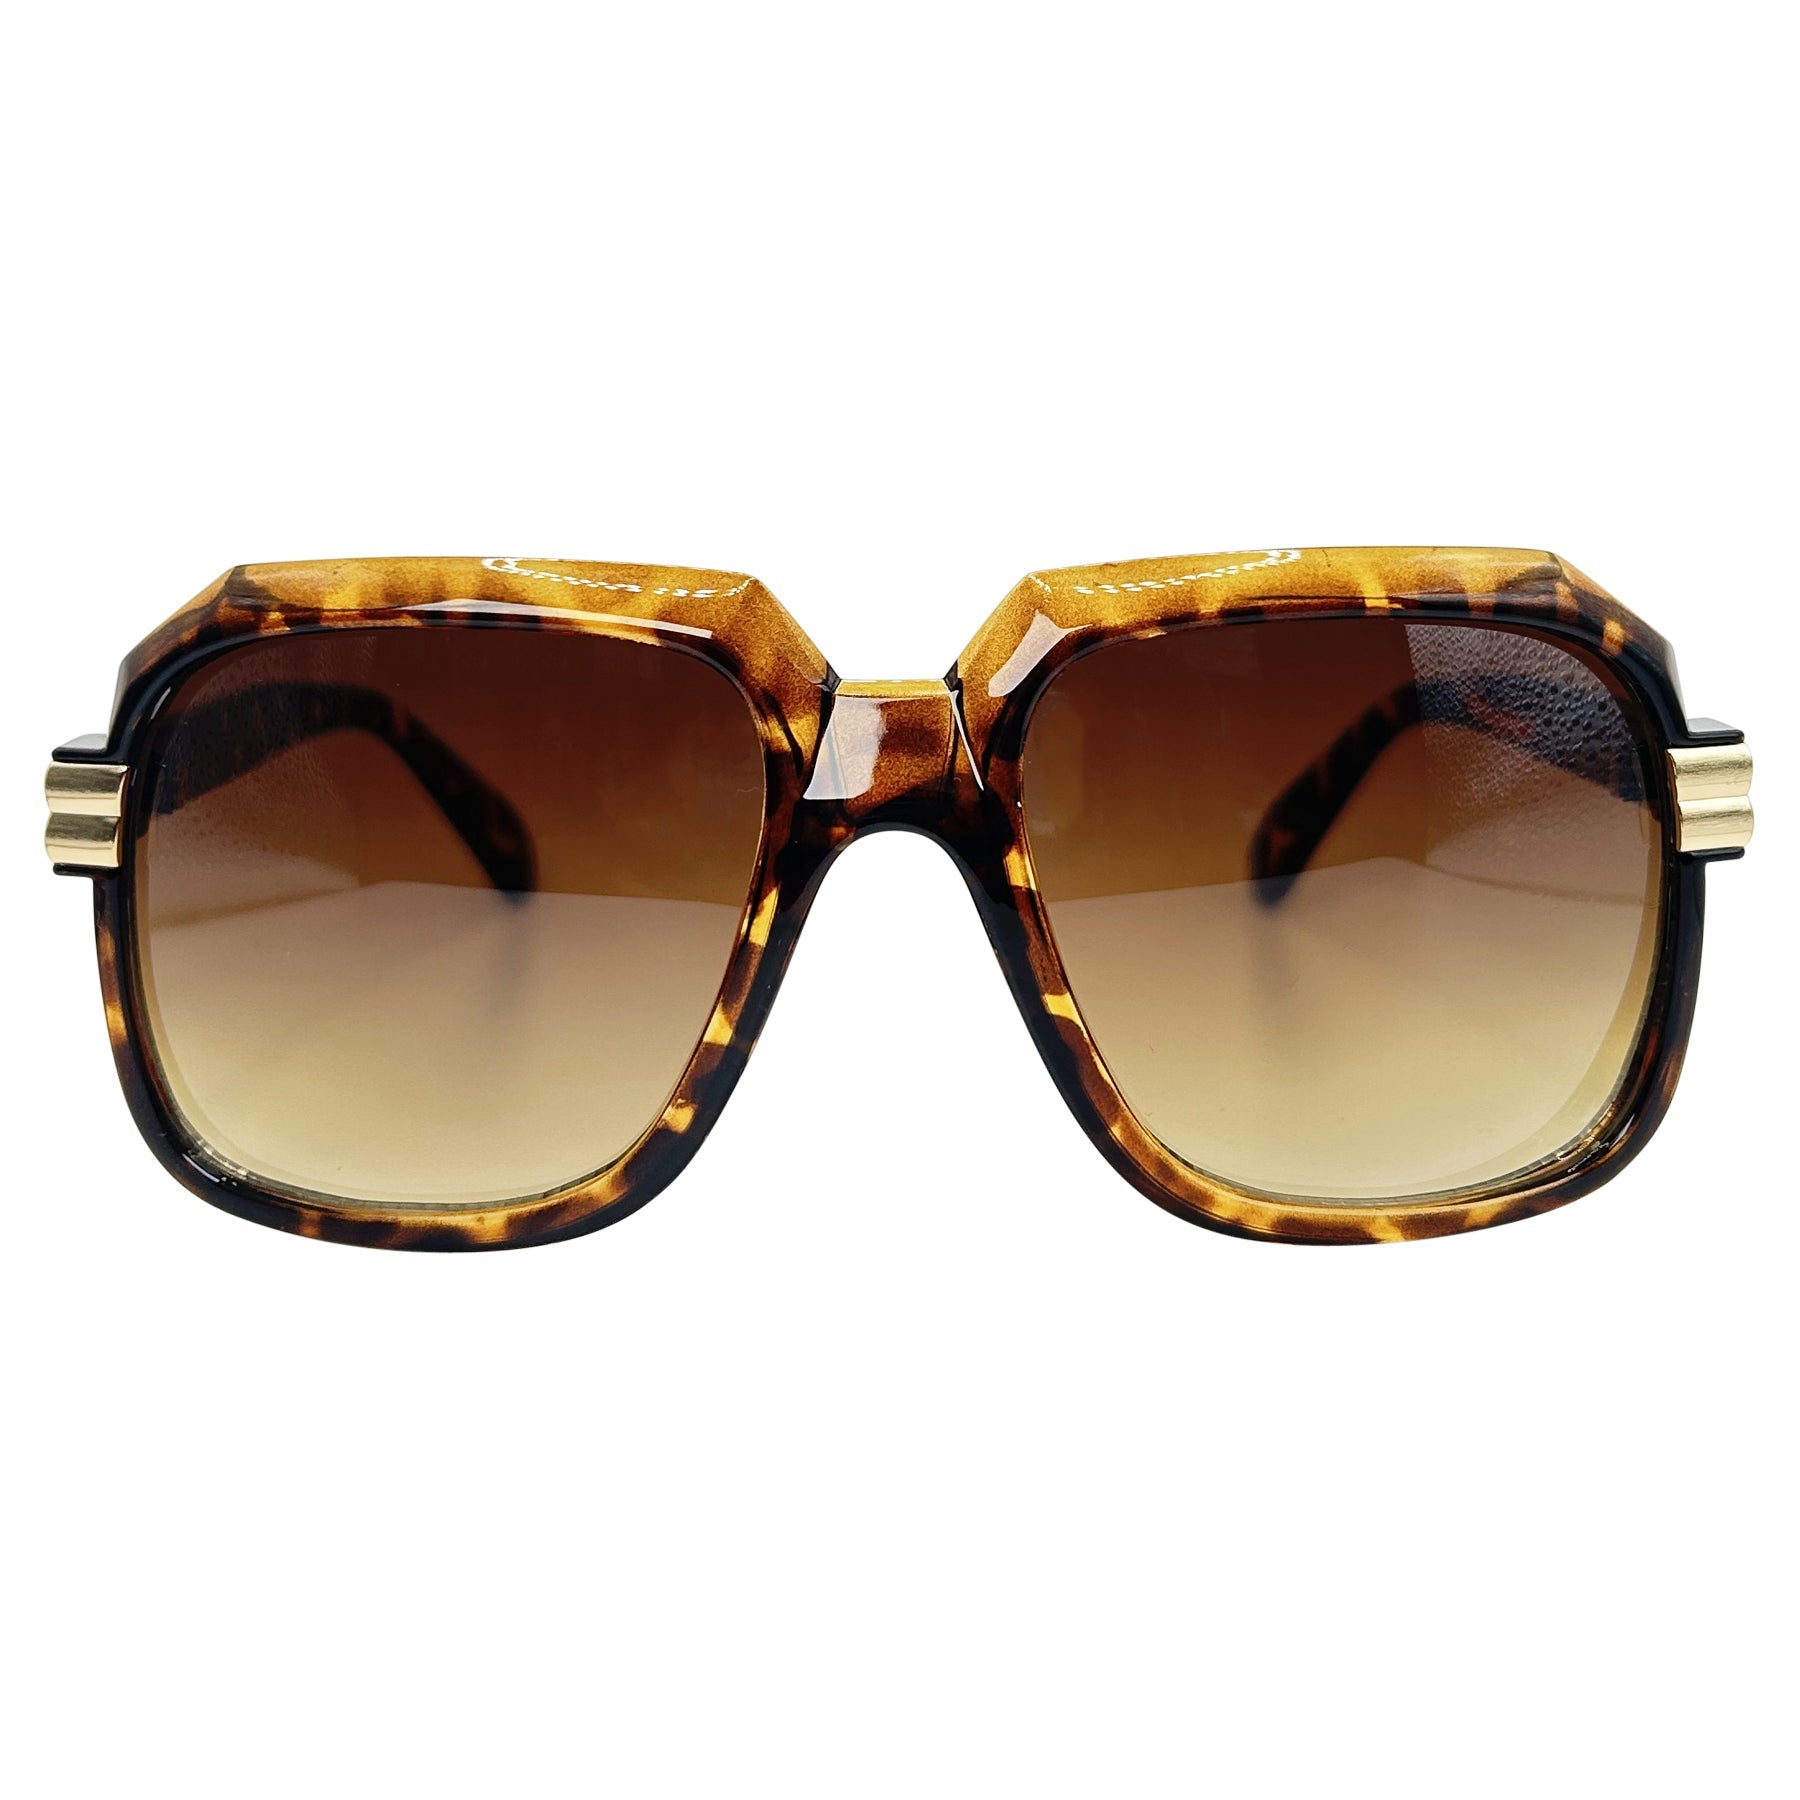 y2k oversized square style tortoise sunglasses with an amber lens